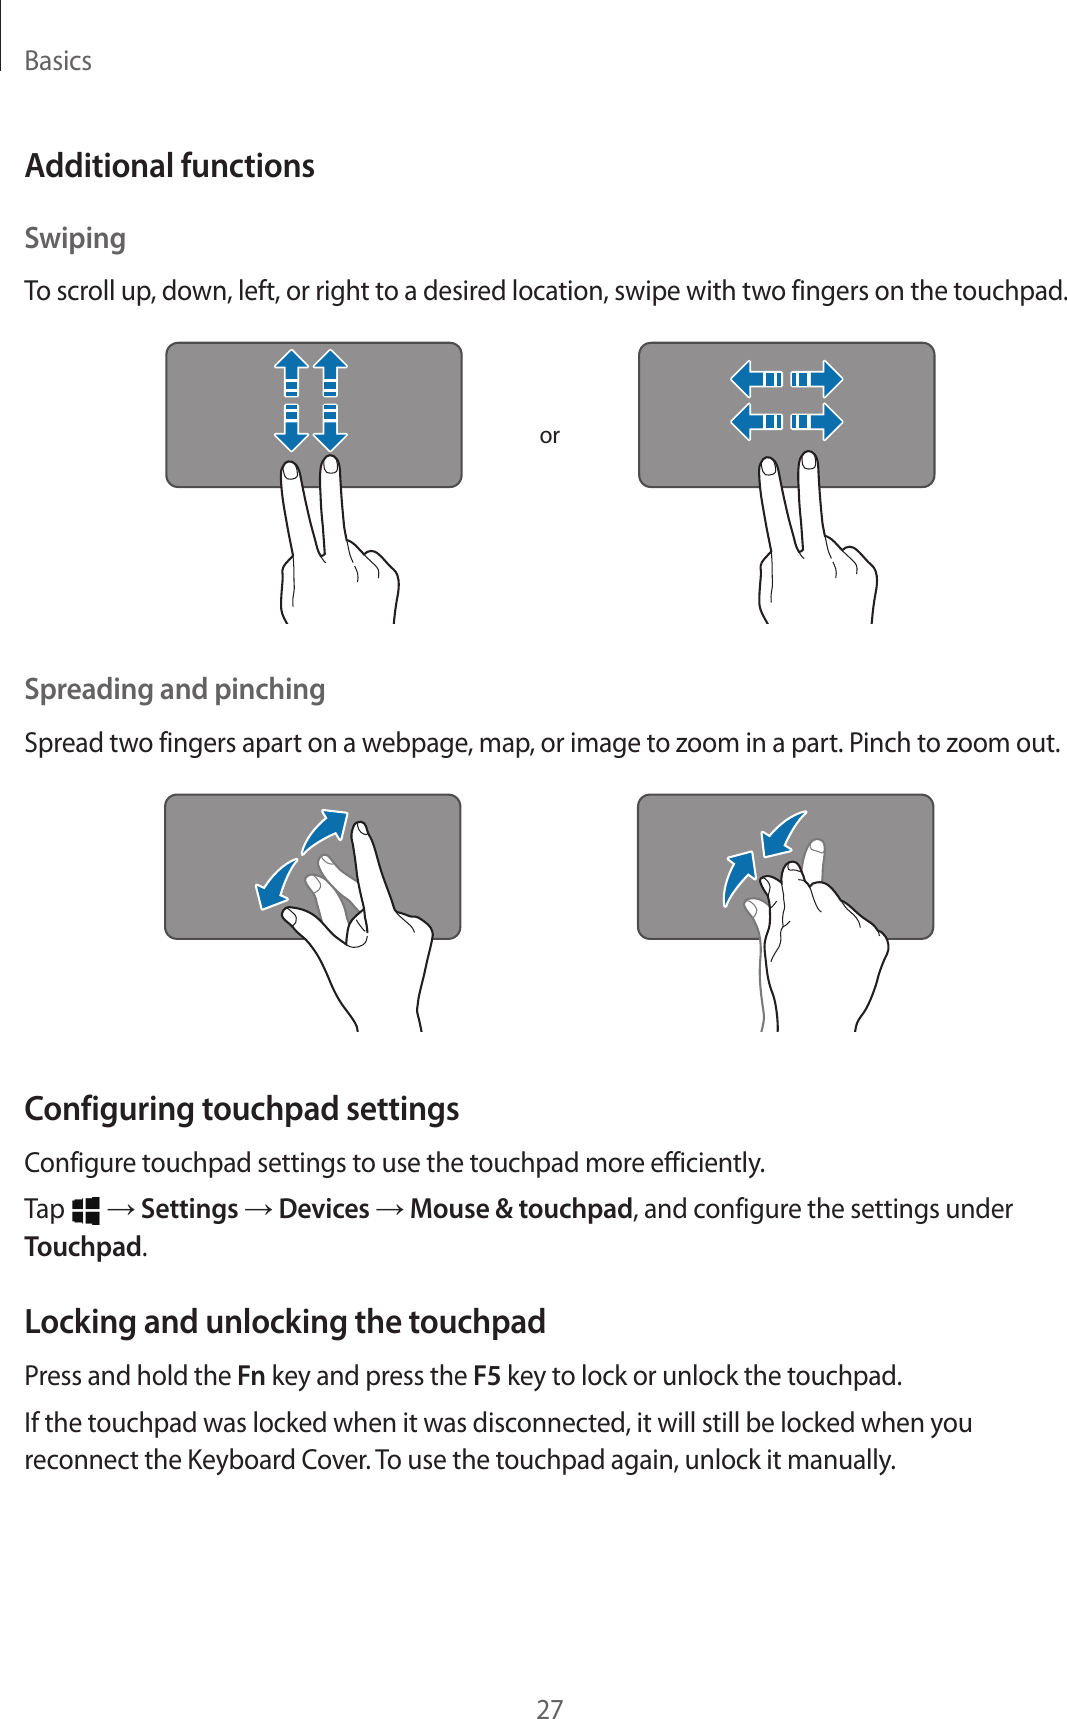 Basics27Additional functionsSwipingTo scroll up, down, left, or right to a desired location, swipe with two fingers on the touchpad.orSpreading and pinchingSpread two fingers apart on a webpage, map, or image to zoom in a part. Pinch to zoom out.Configuring touchpad settingsConfigure touchpad settings to use the touchpad more efficiently.Tap   → Settings → Devices → Mouse &amp; touchpad, and configure the settings under Touchpad.Locking and unlocking the touchpadPress and hold the Fn key and press the F5 key to lock or unlock the touchpad.If the touchpad was locked when it was disconnected, it will still be locked when you reconnect the Keyboard Cover. To use the touchpad again, unlock it manually.